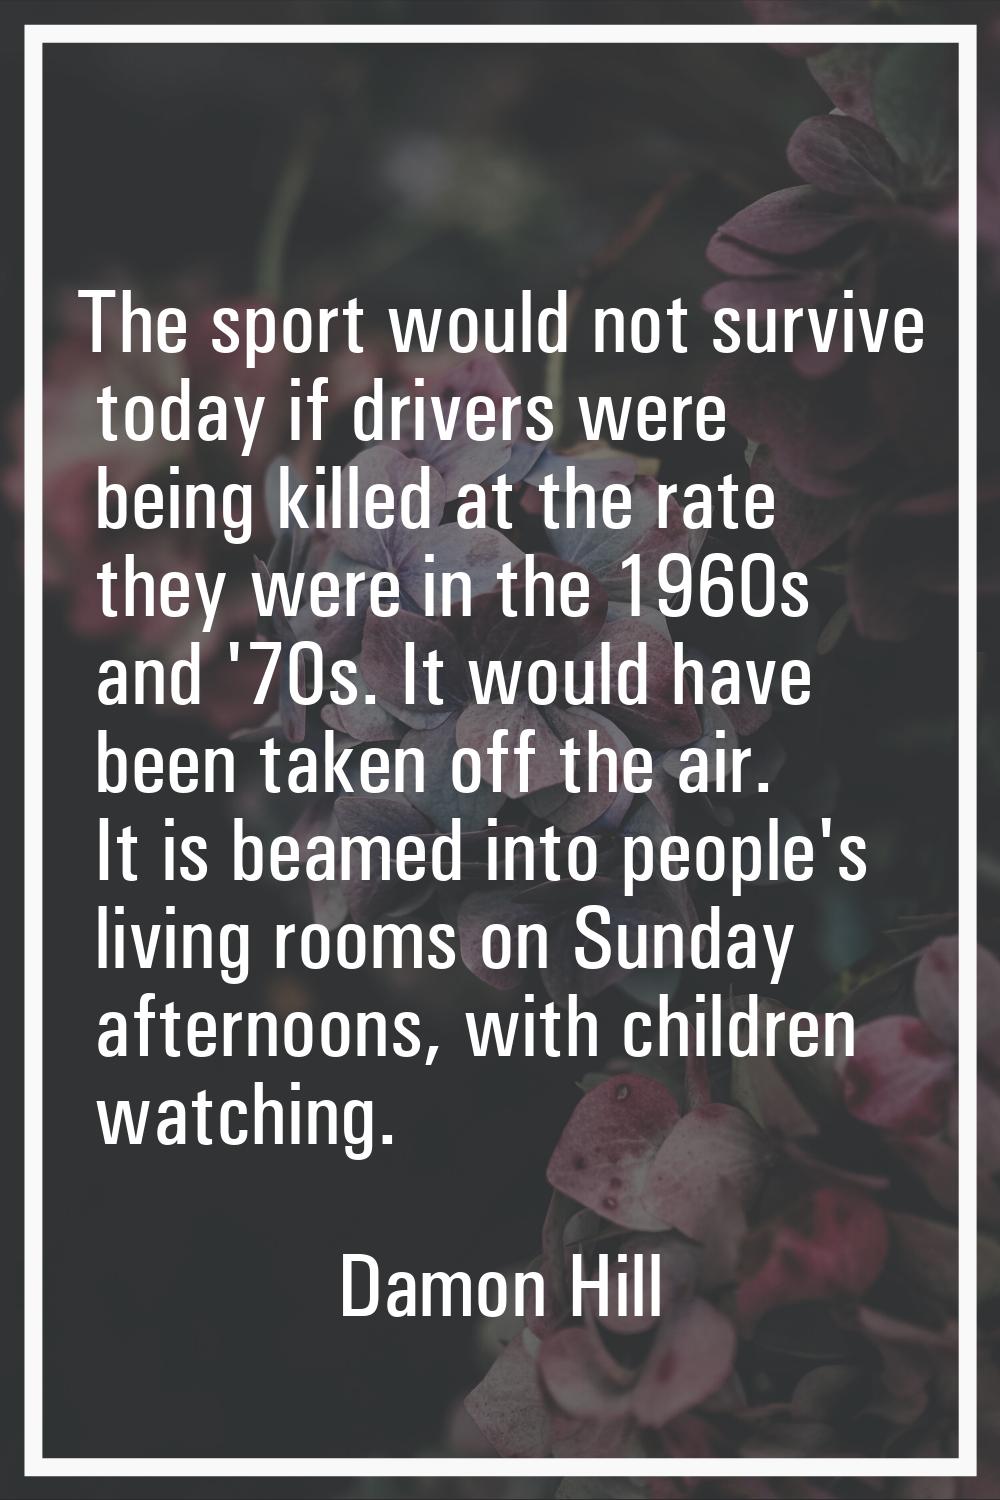 The sport would not survive today if drivers were being killed at the rate they were in the 1960s a